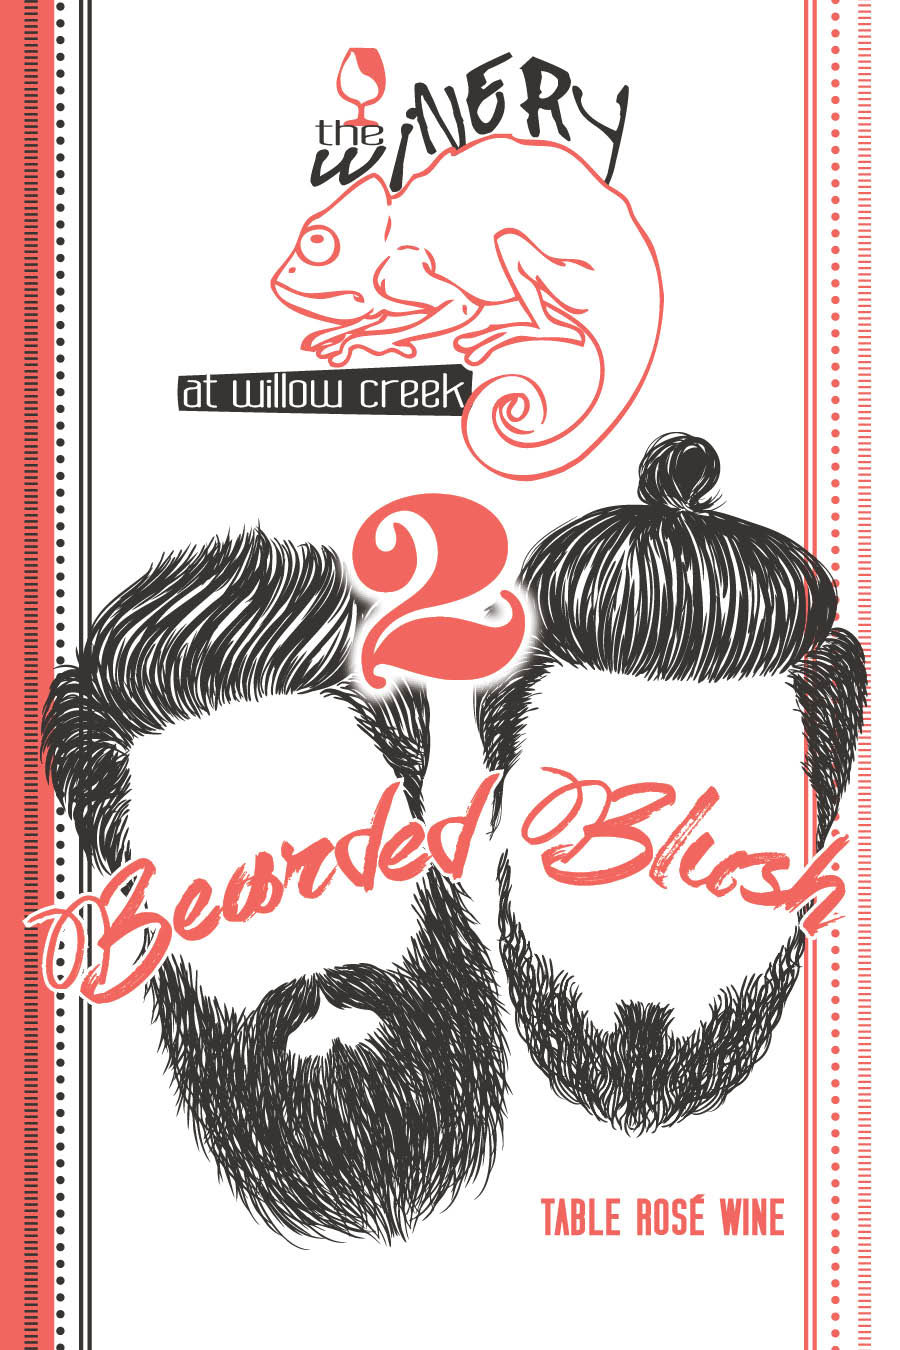 Product Image for 2 Bearded Blush 